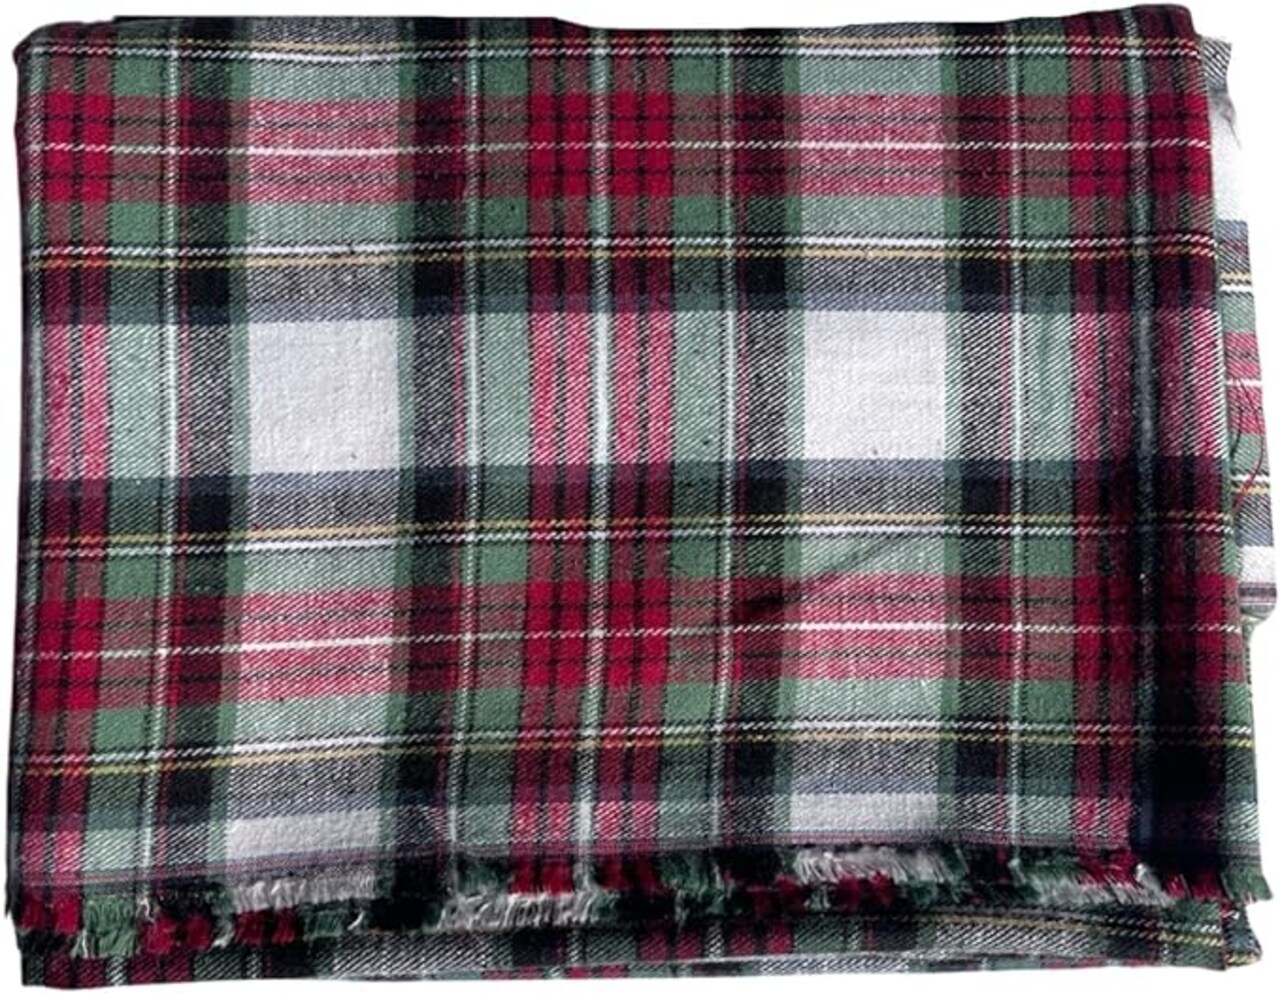 FabricLA 100% Cotton Flannel Fabric - 58/60 Inches (150 CM) - Cotton  Tartan Flannel Fabric - Use as Blanket, PJ, Shirt, Cloth Flannel Craft  Fabric - Multi, 5 Continuous Yard